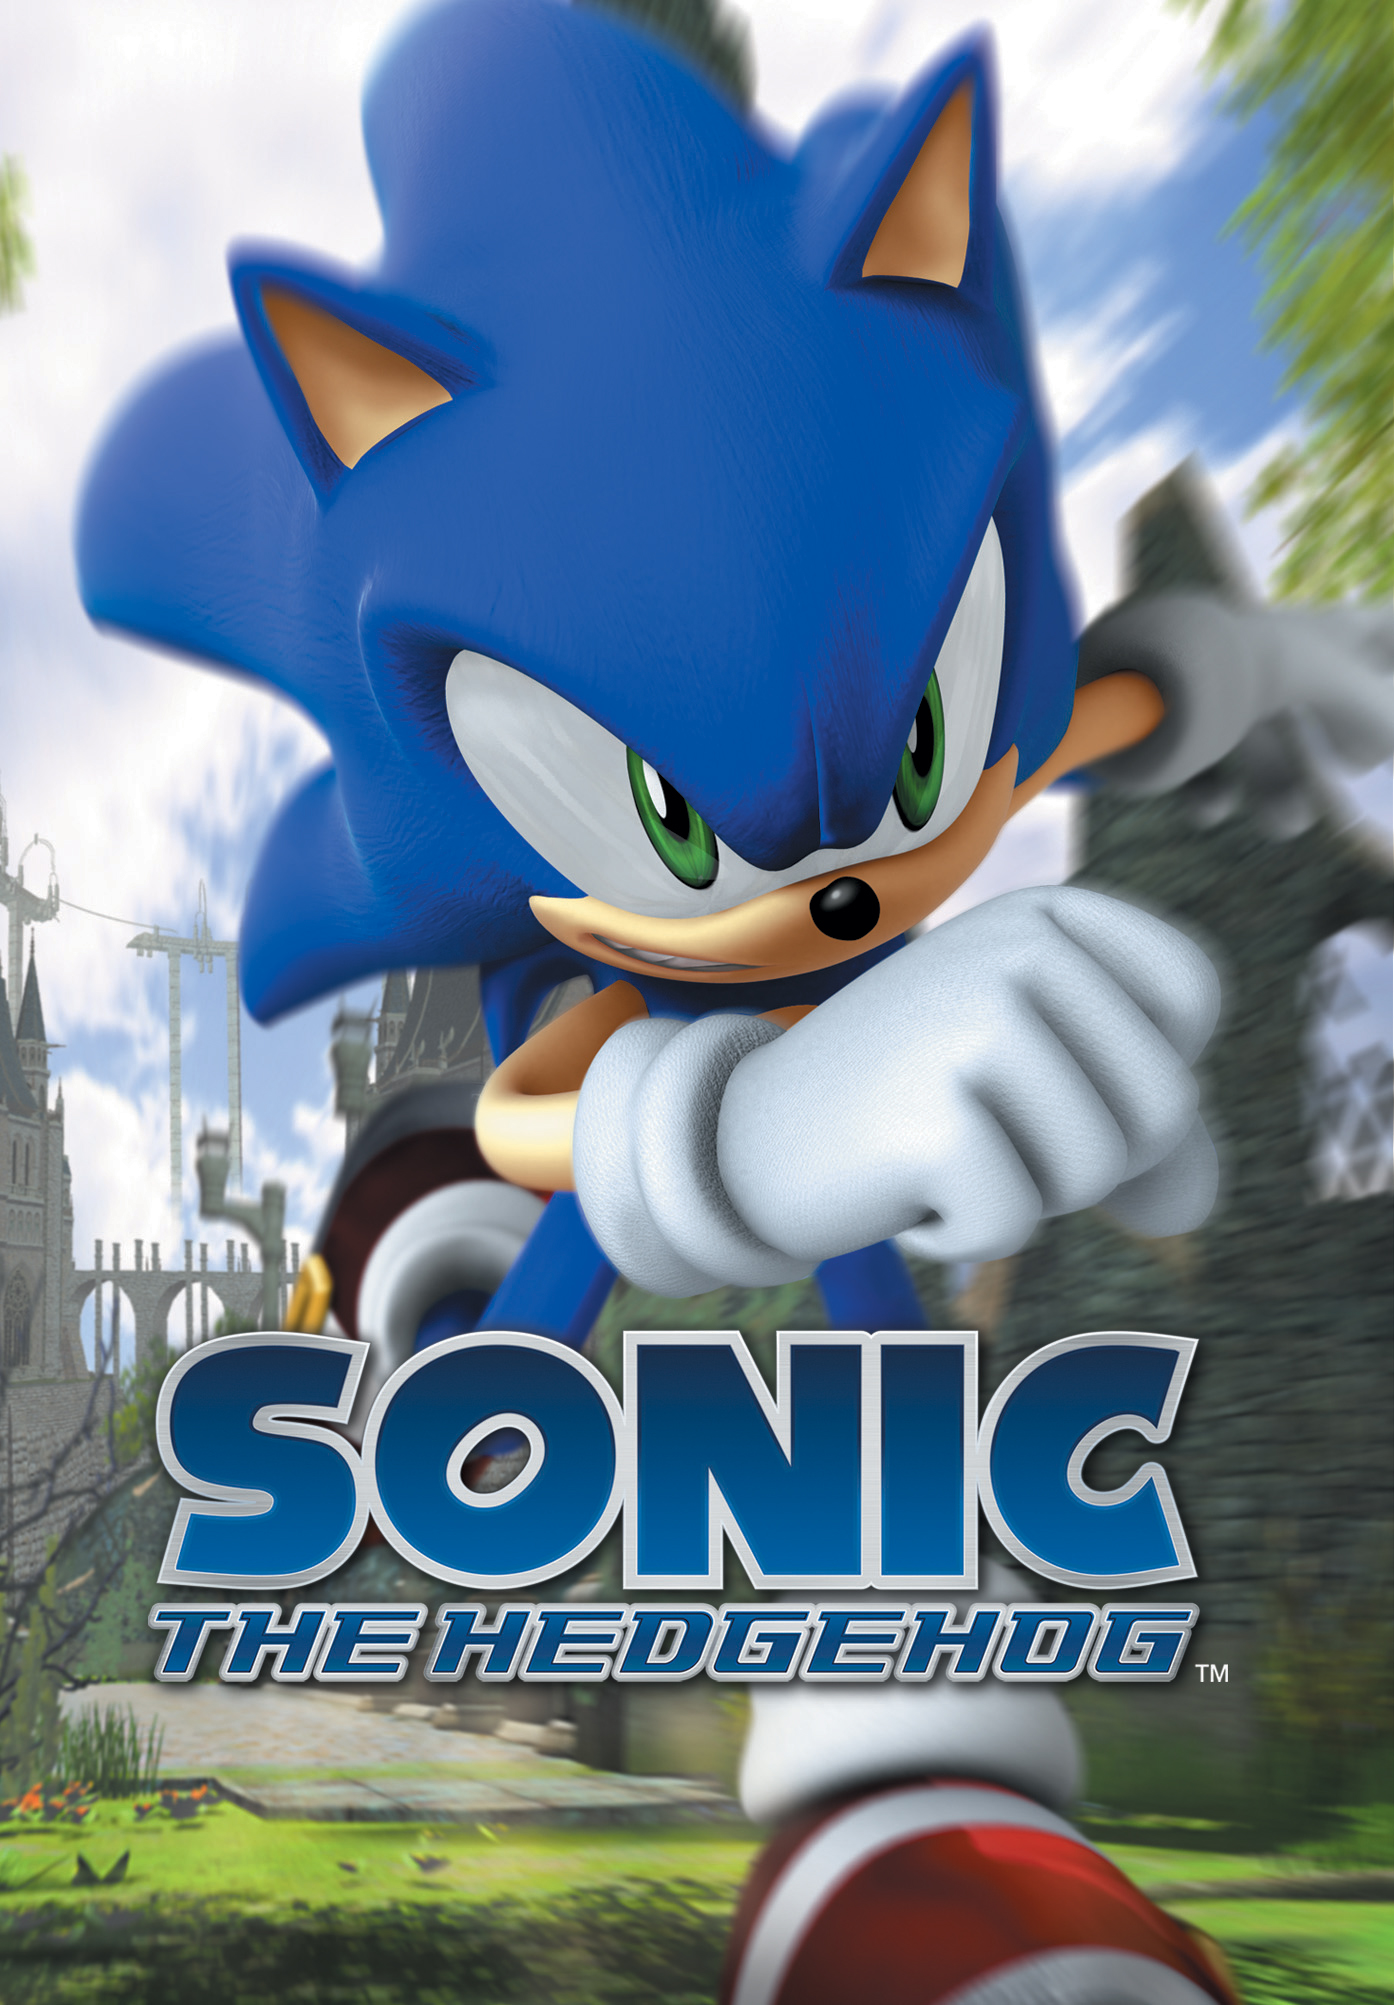 sonic project x love disaster complete save file 5.5 download